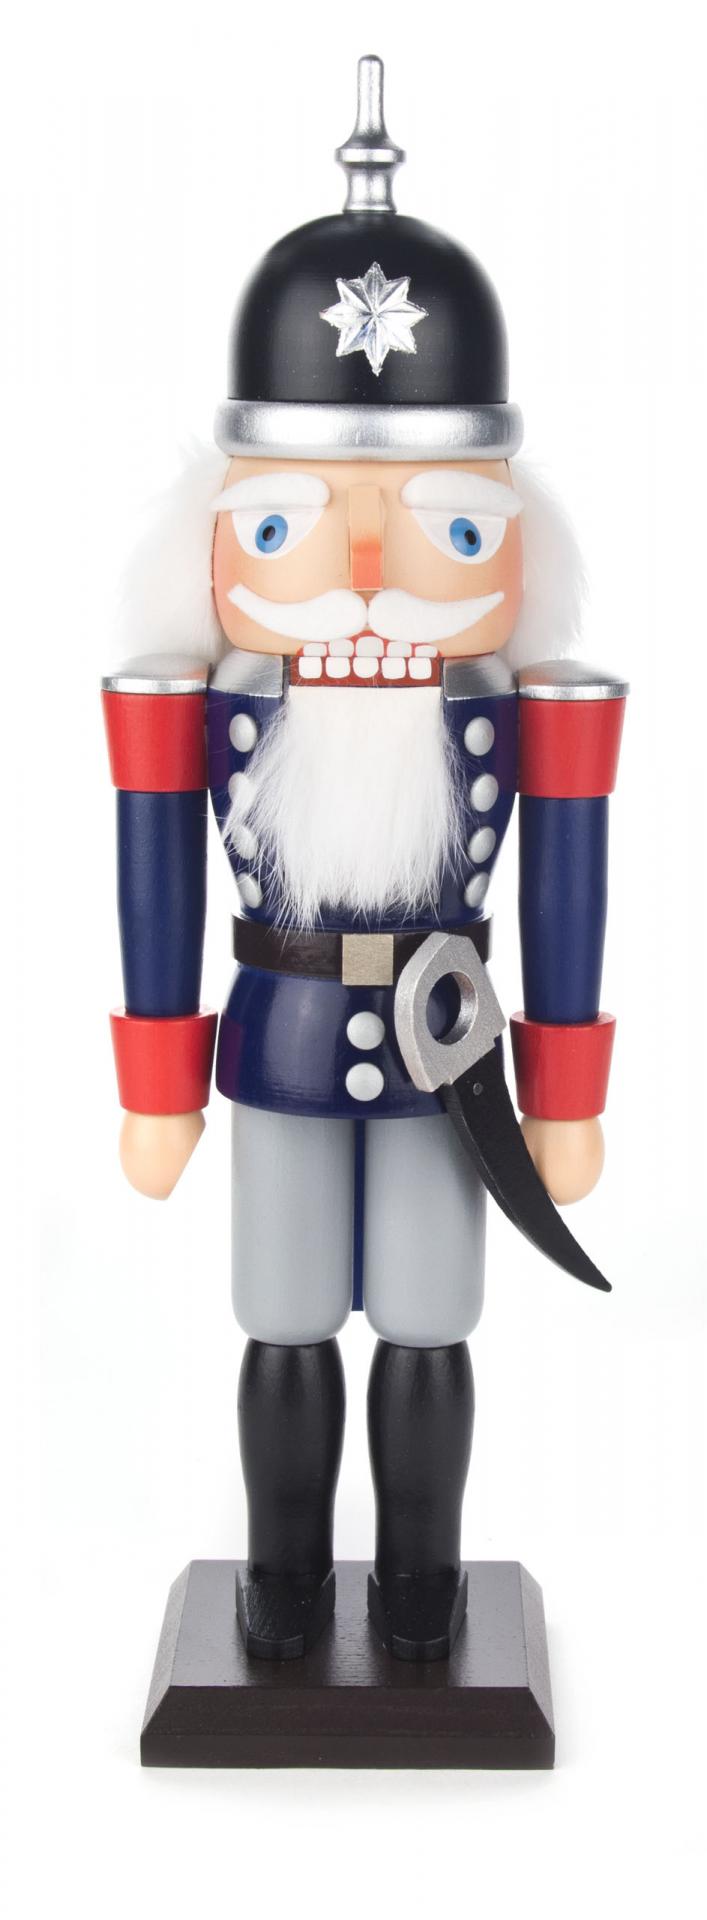 024/017 - Soldier Nutcracker with Blue & Red Accents